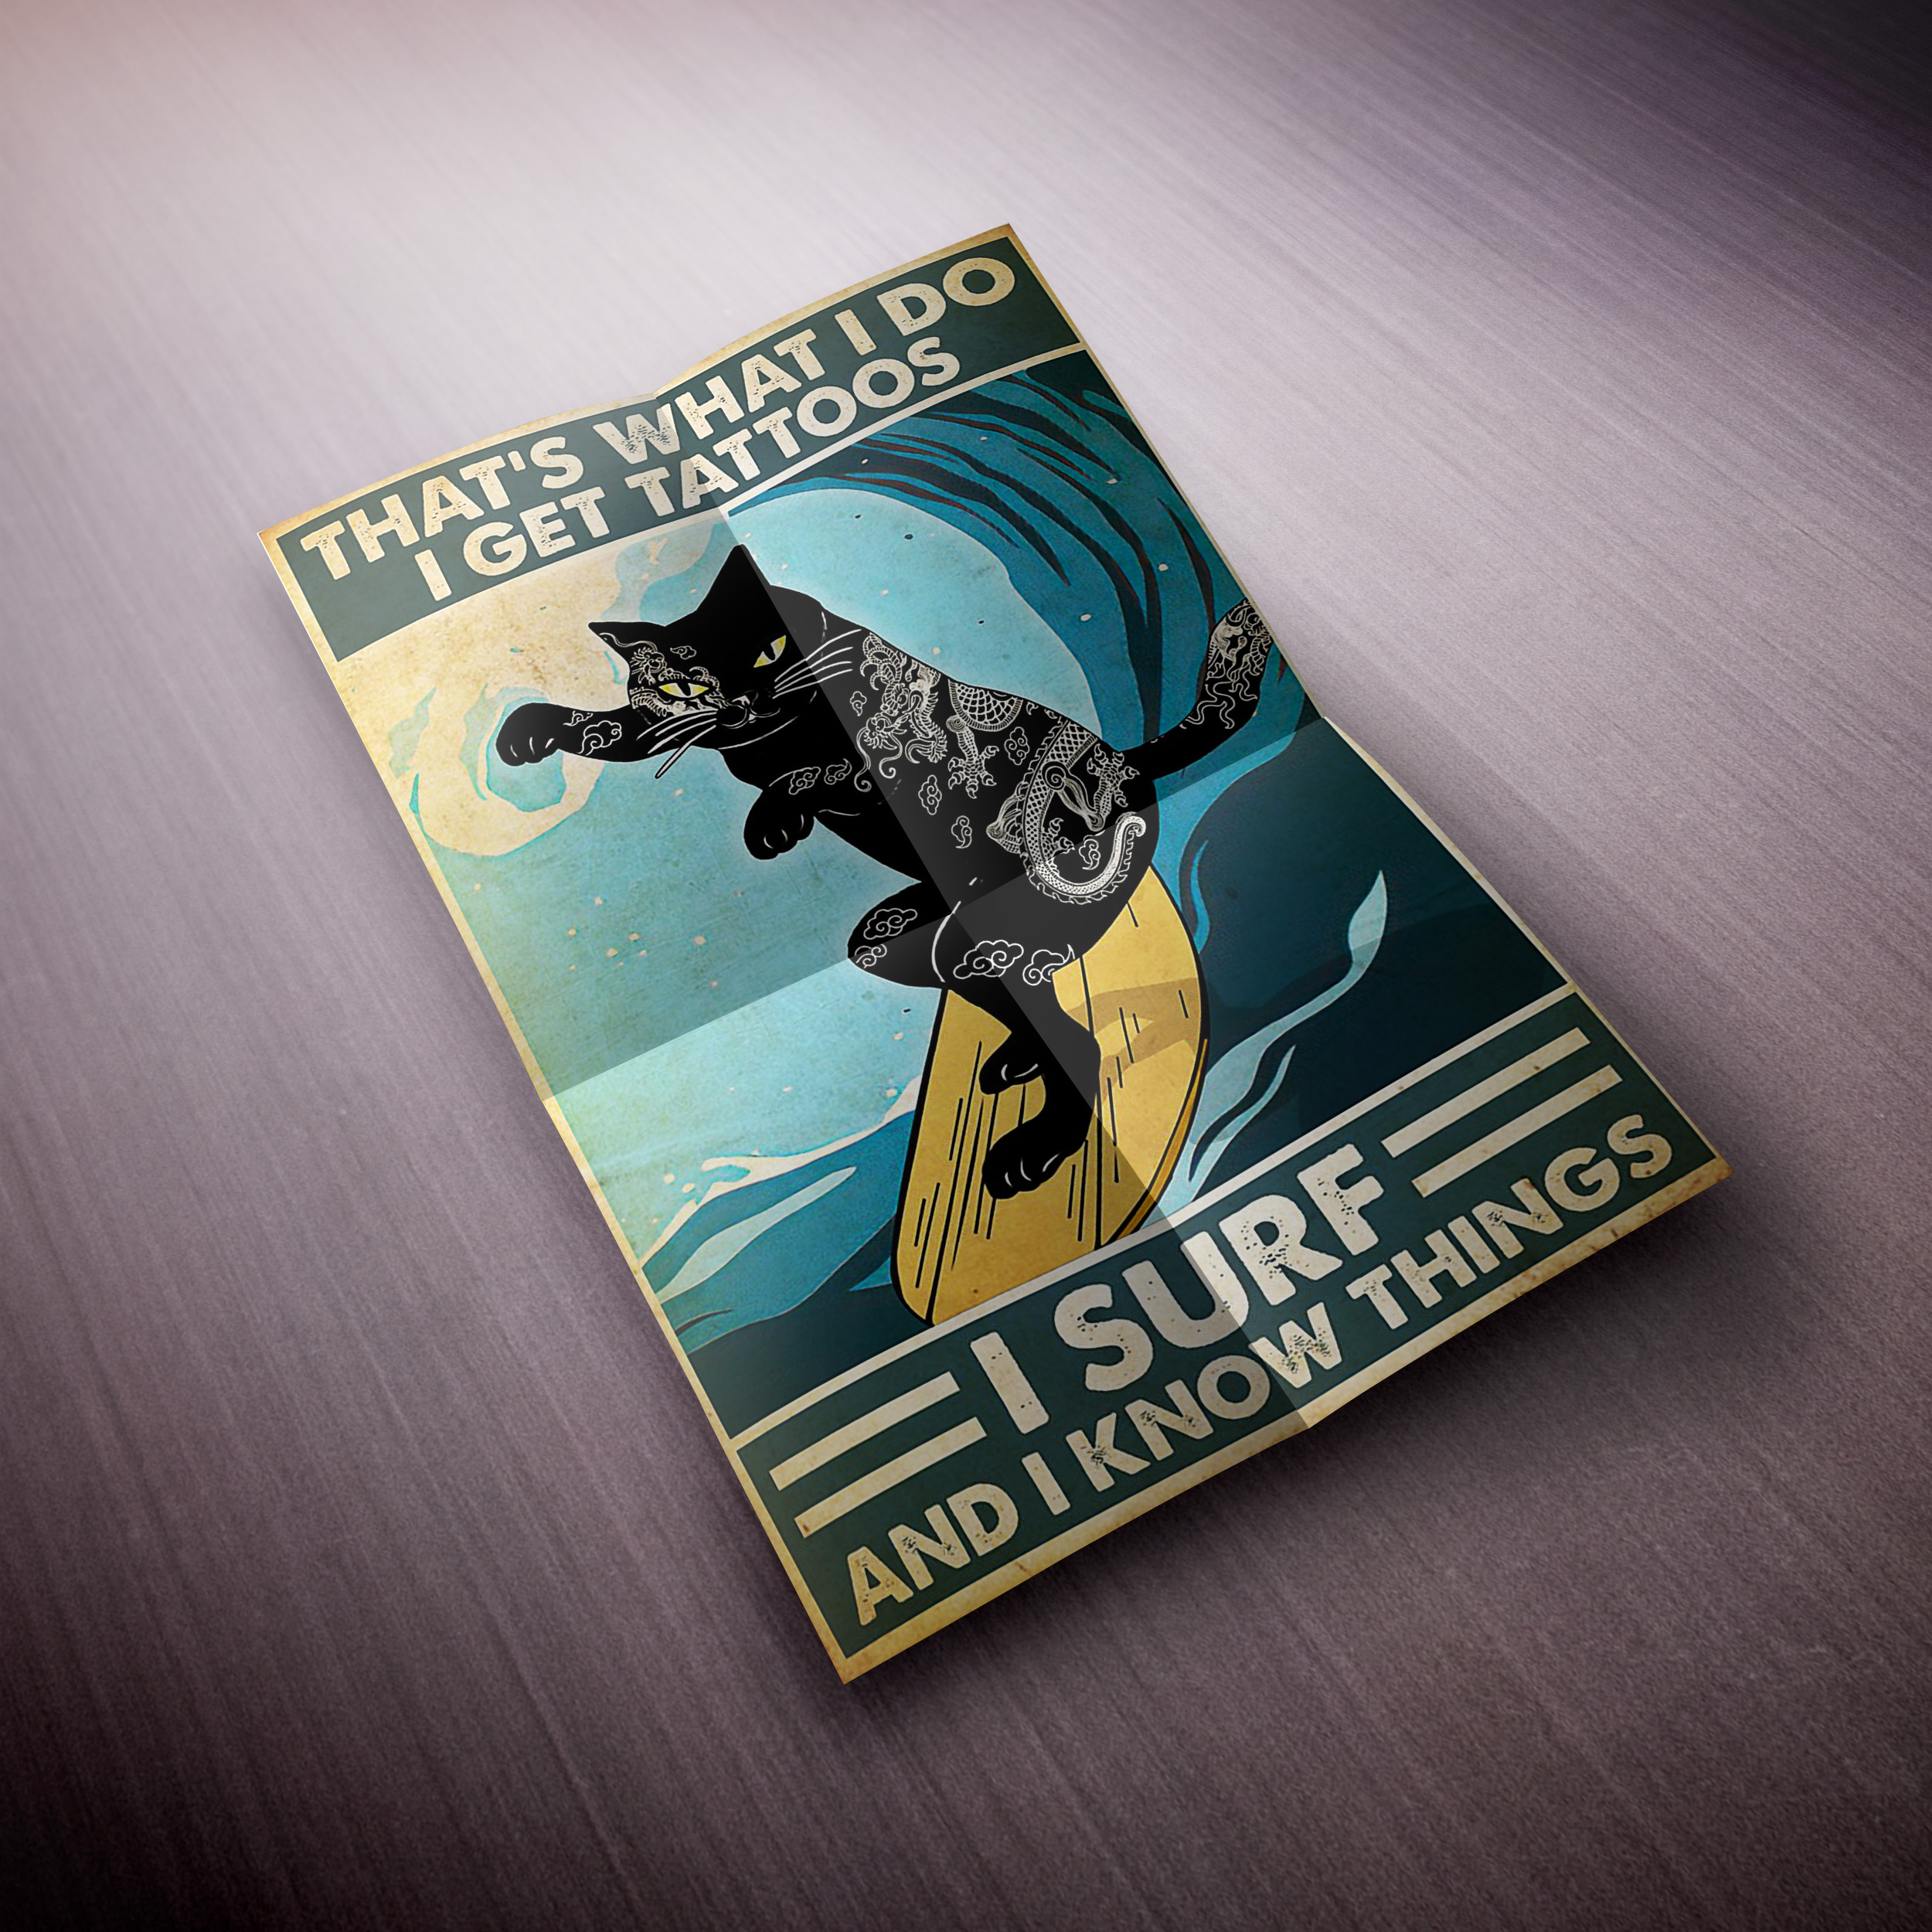 Cat surfing that's what i do i get tattoos poster